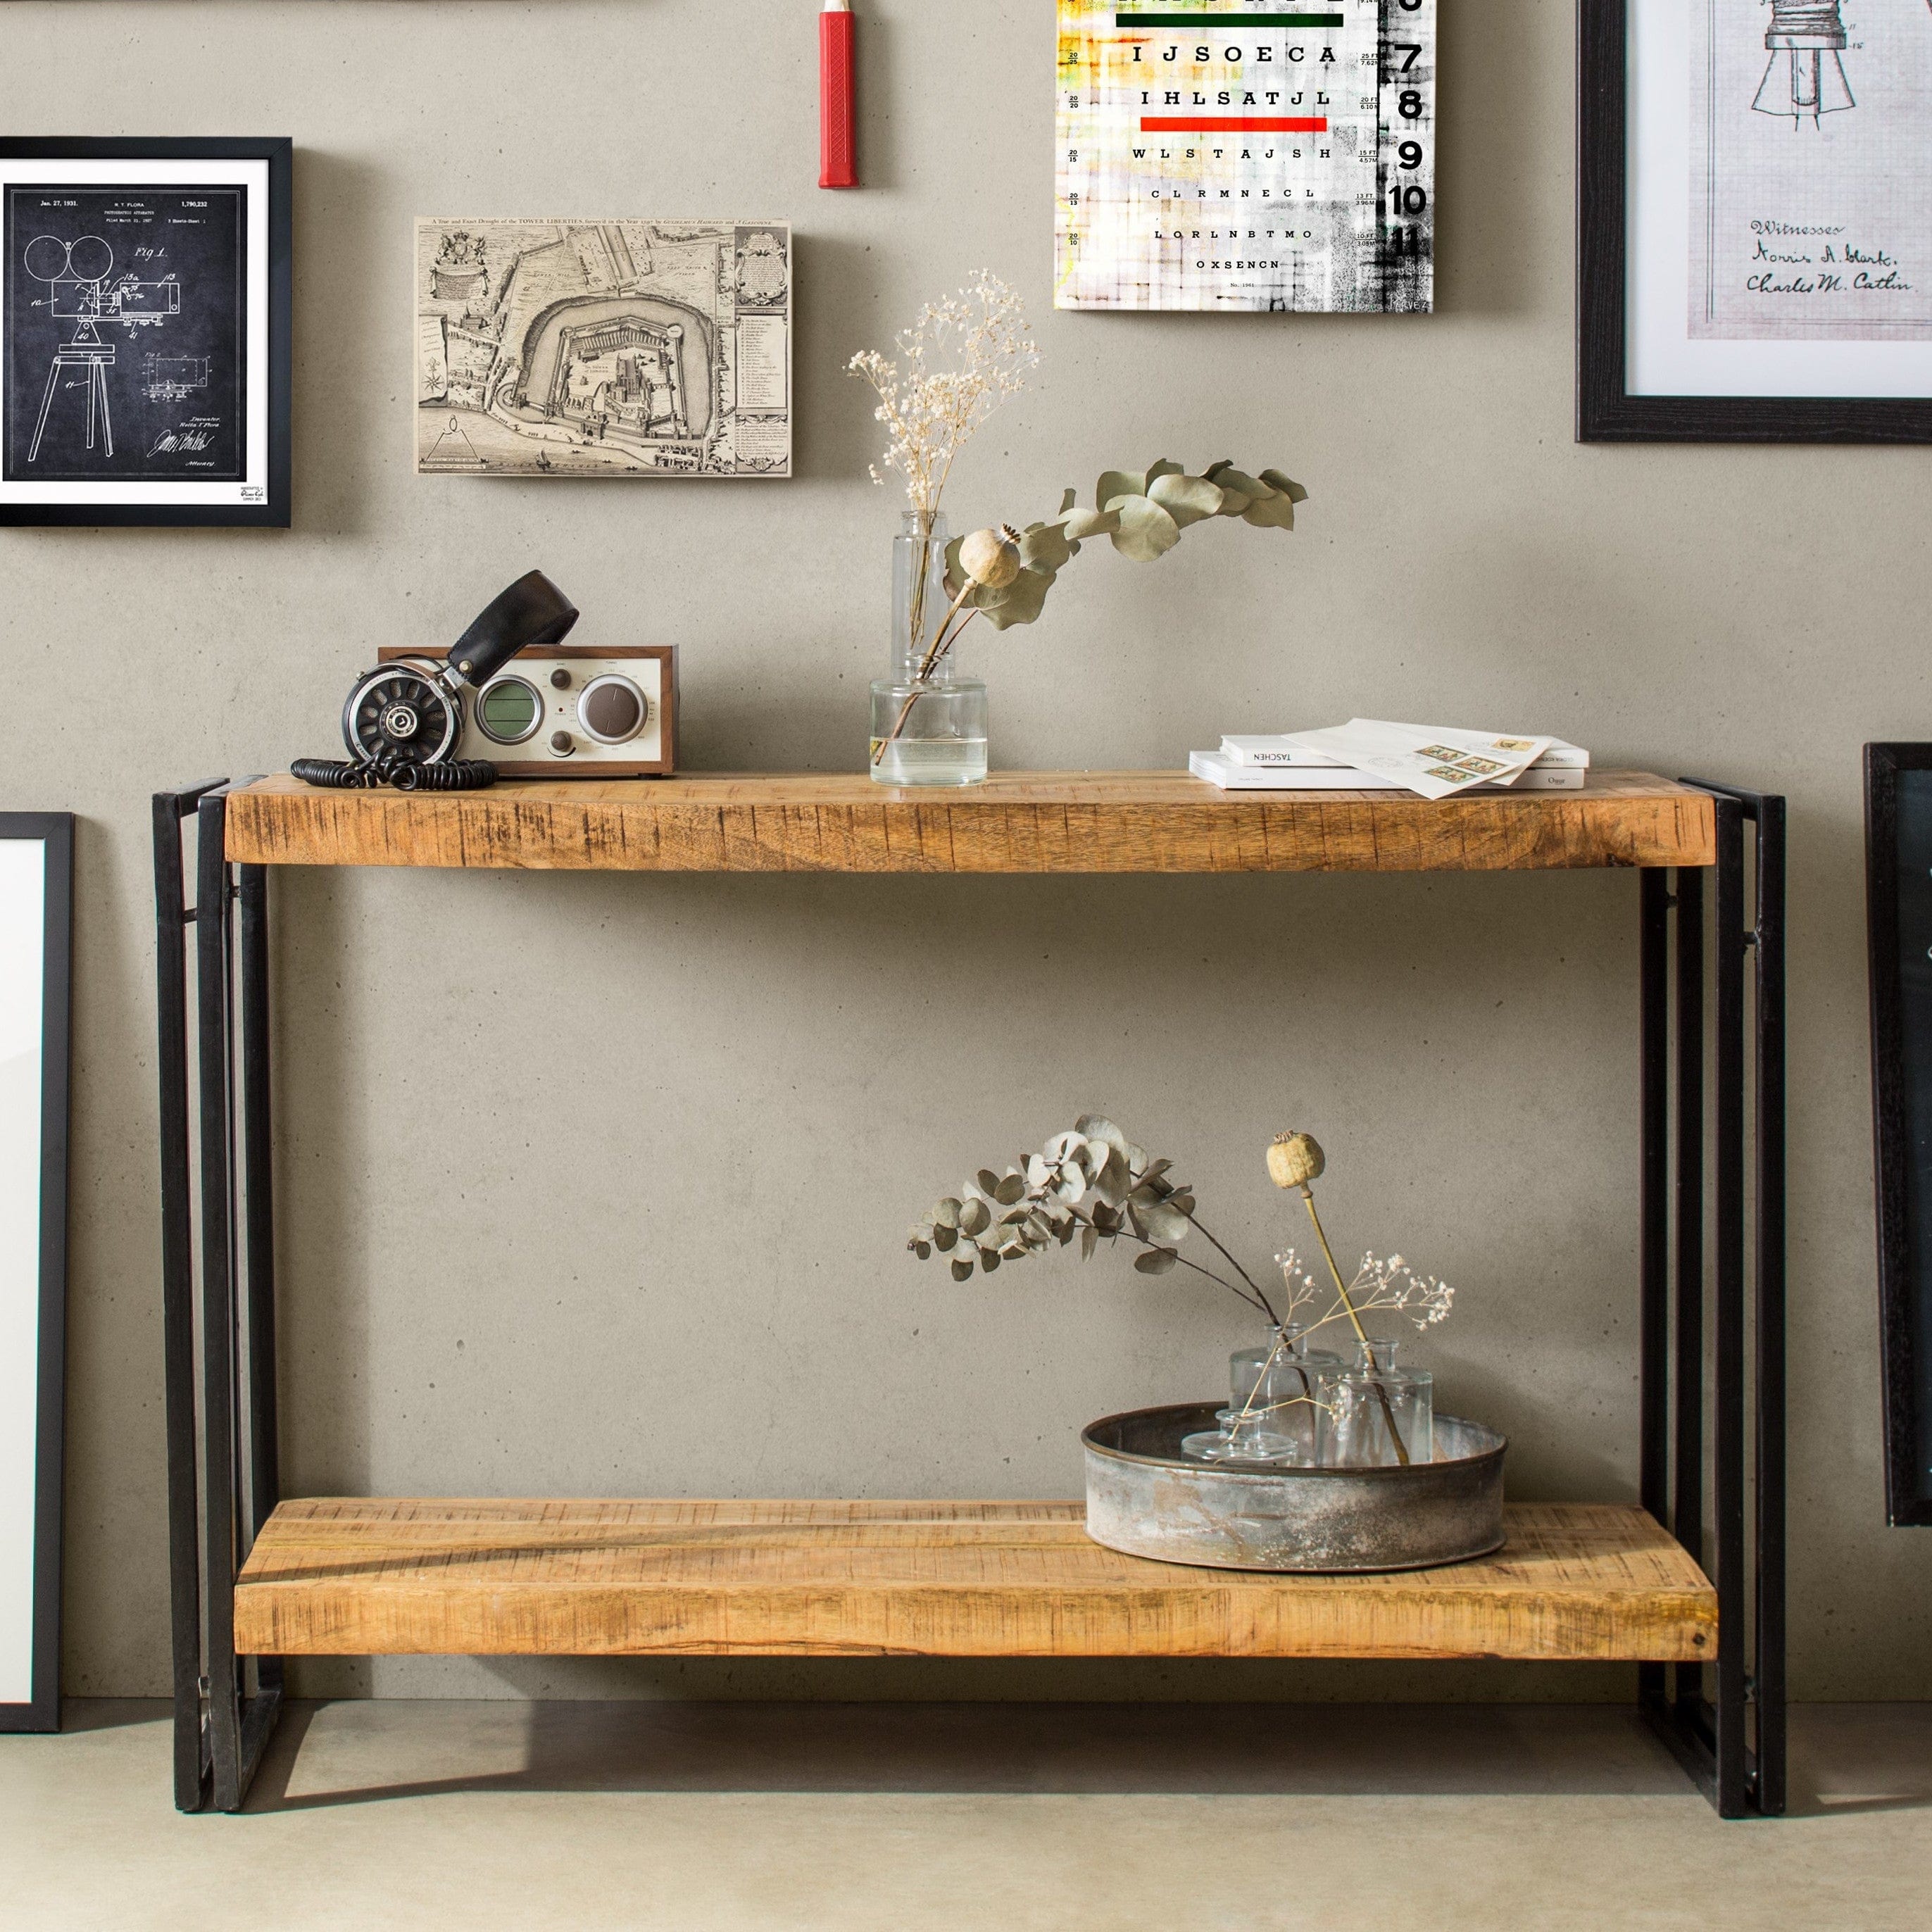 oft raw mango wood and reclaimed metal industrial console table with 2 shelves | MalletandPlane.com